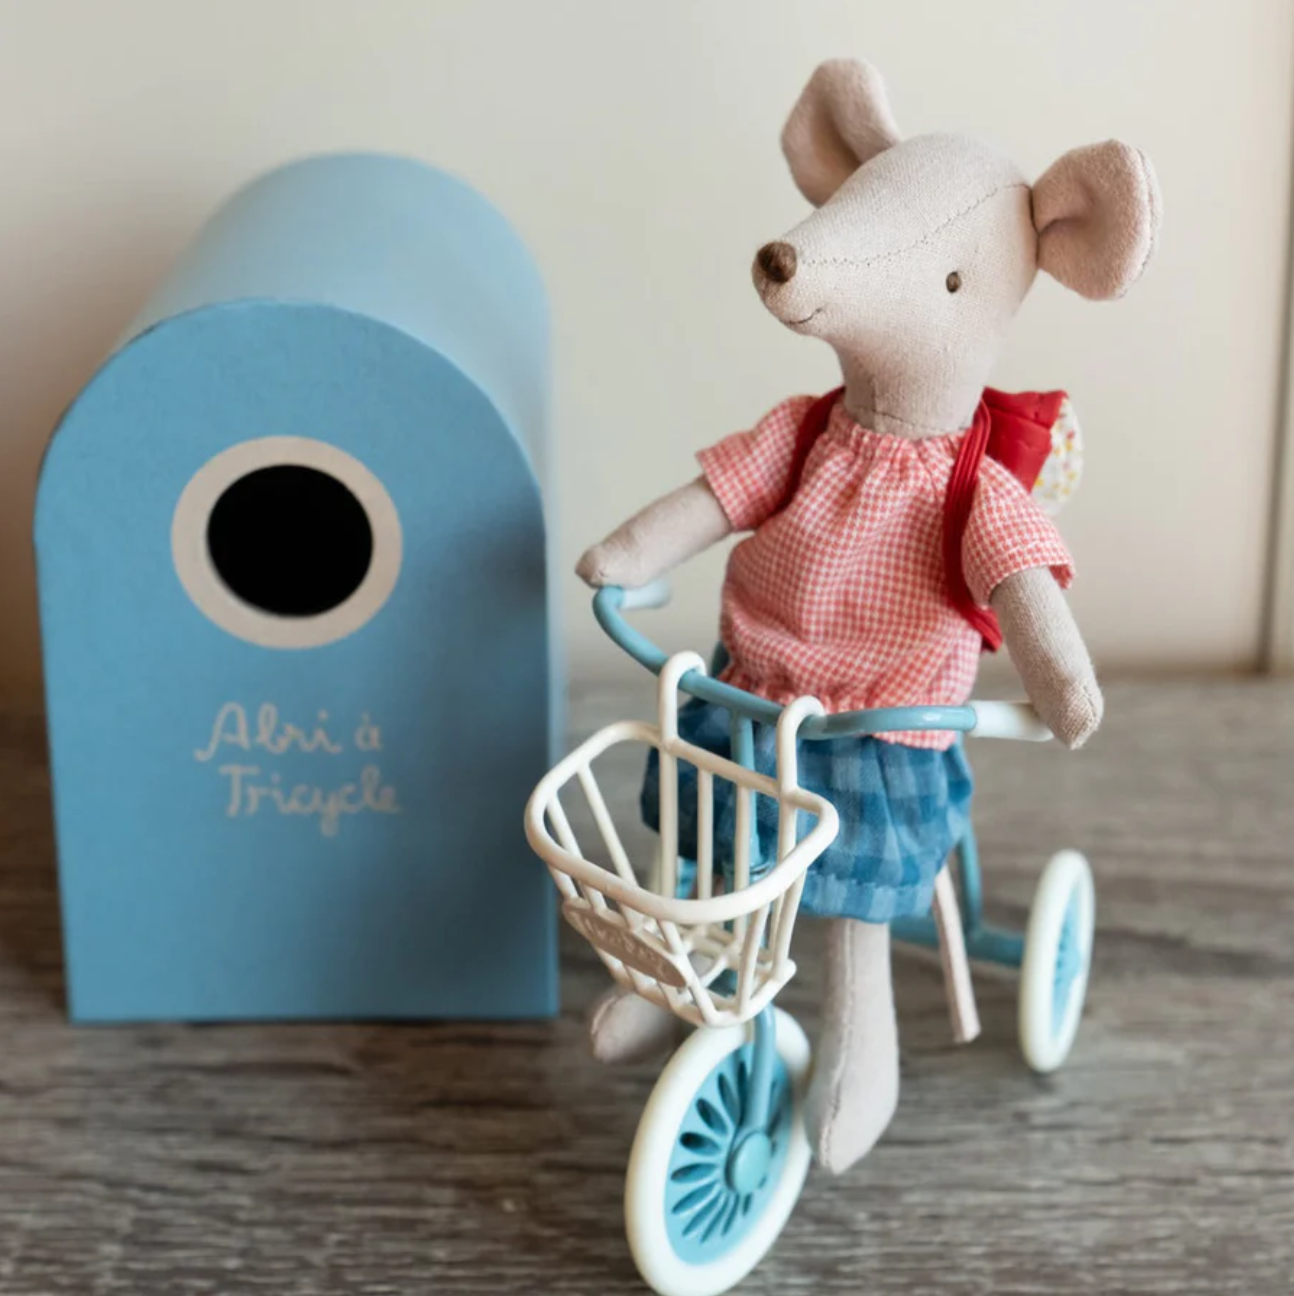 PRE-ORDER Maileg Tricycle Basket (Mouse)